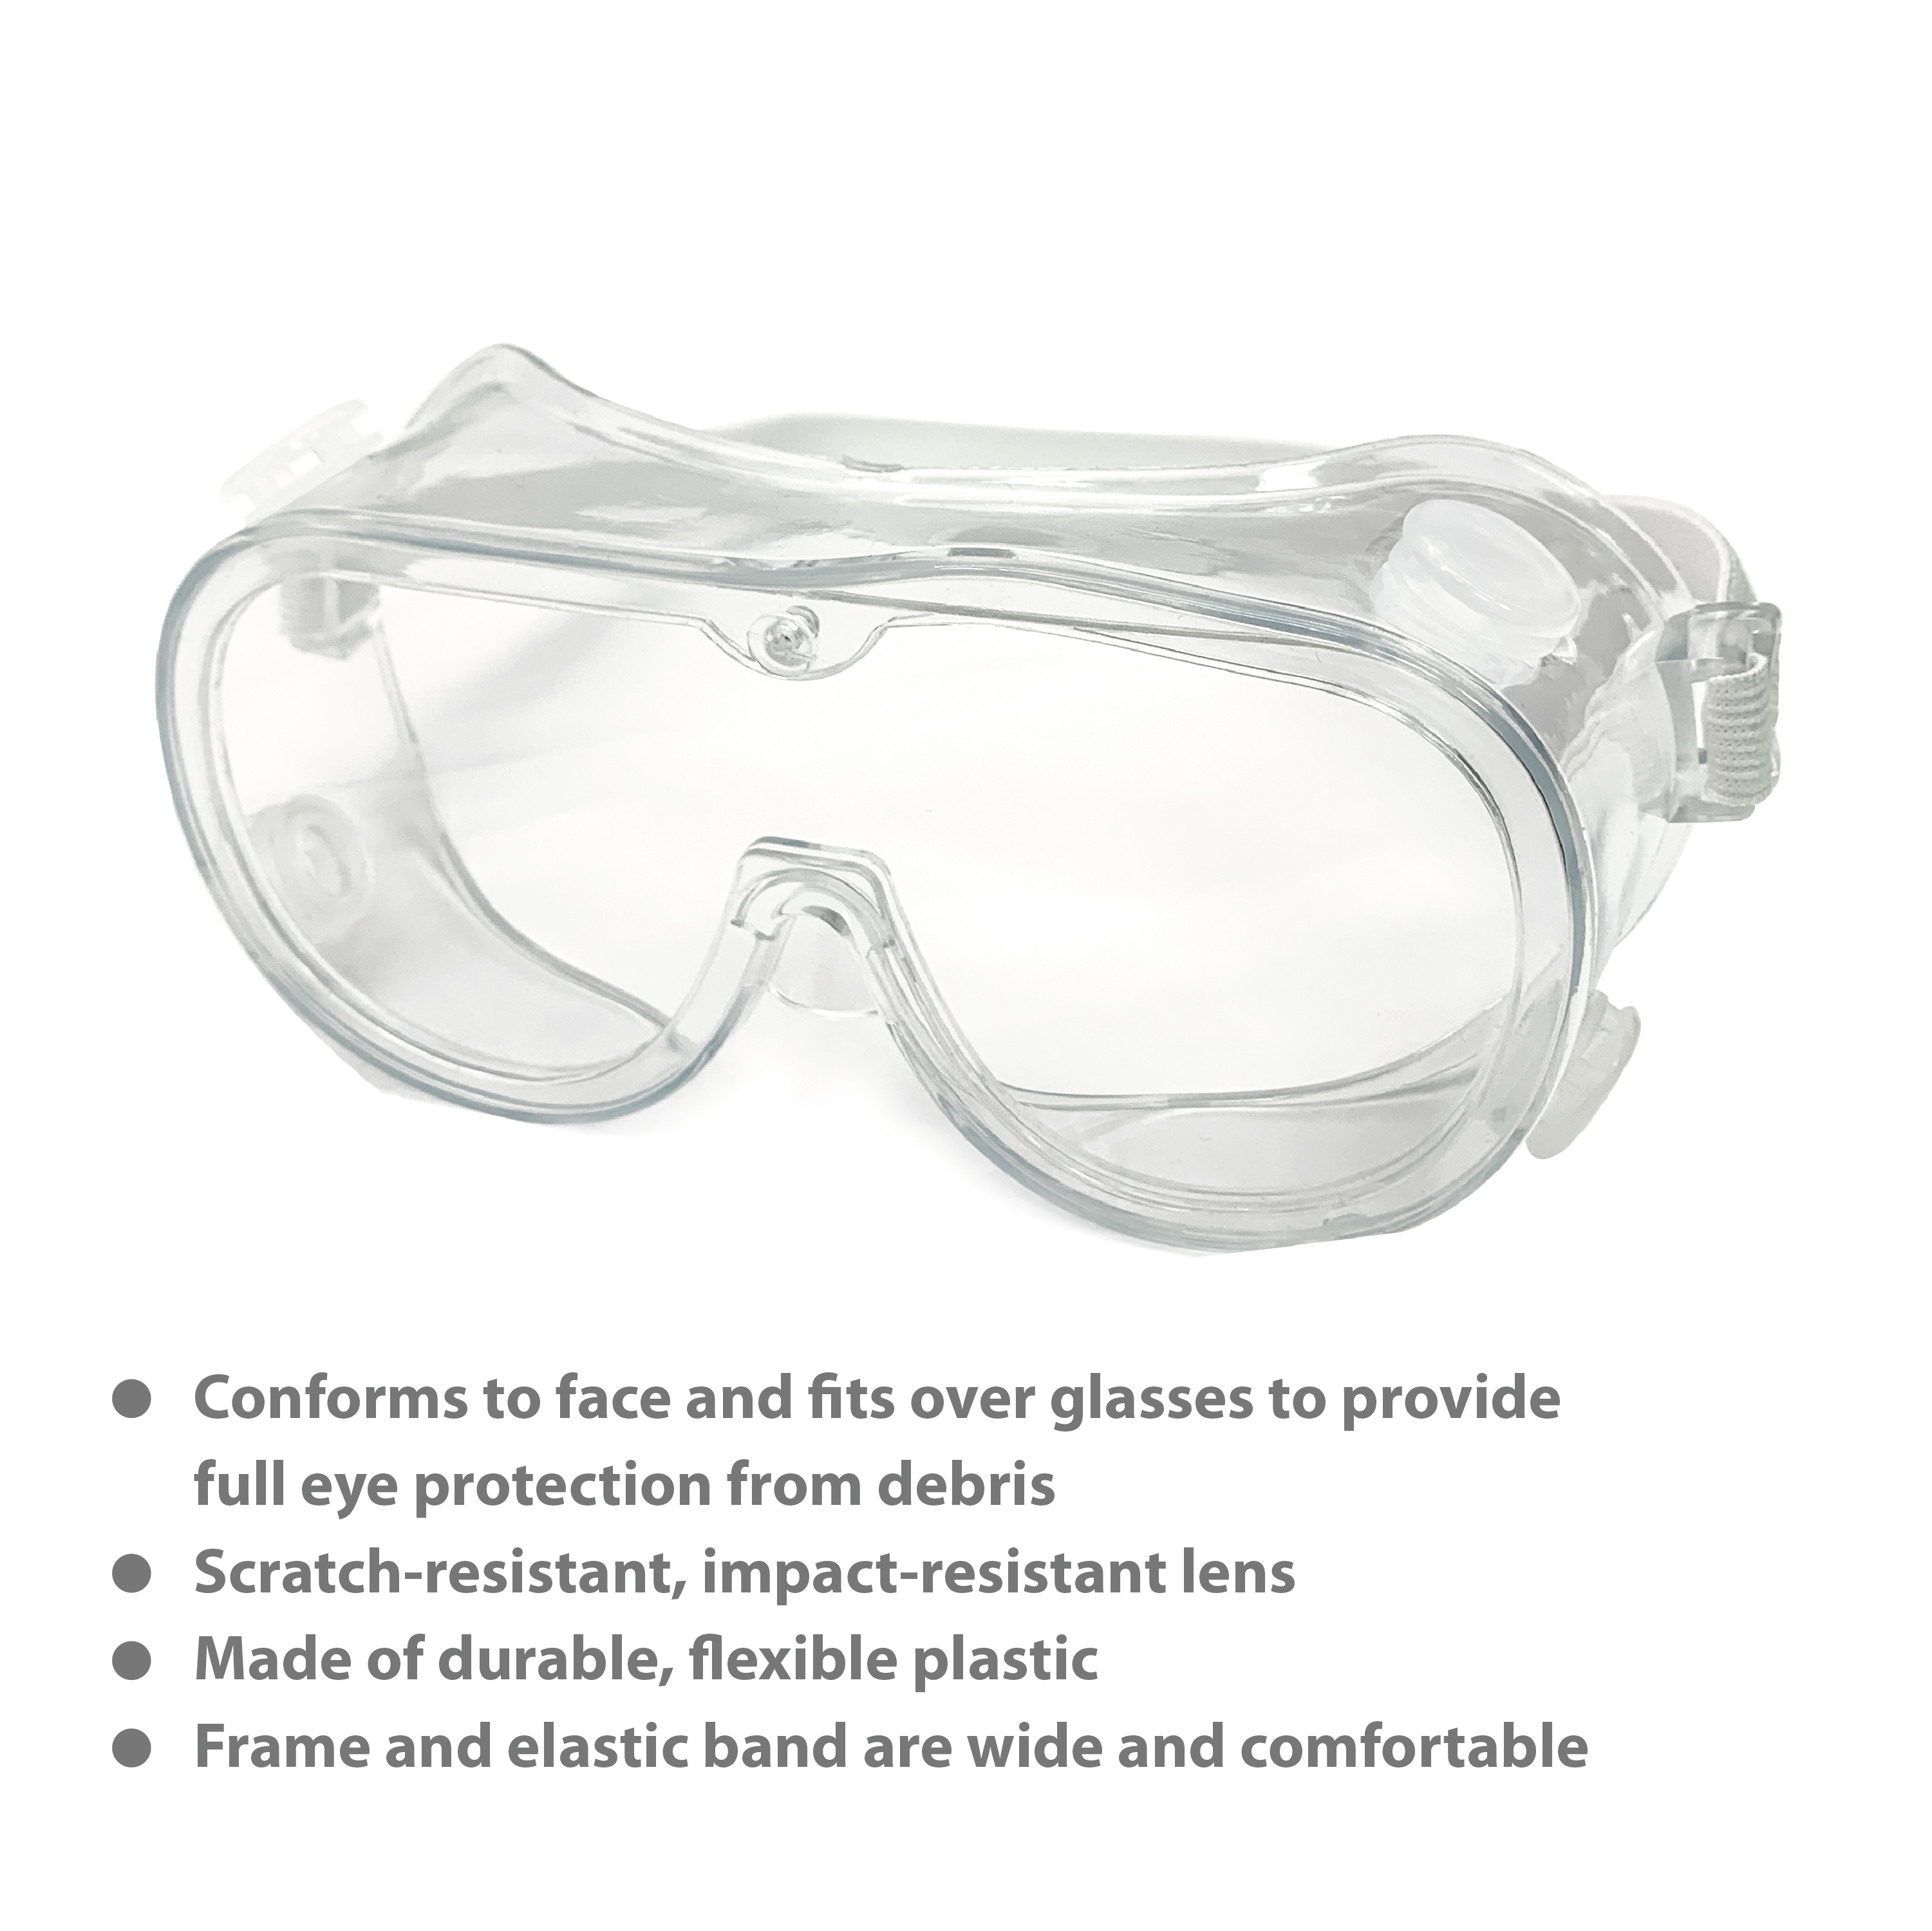 Zak Personal Protective Equipment (PPE) Protective Goggles, Clear, 2-piece set slideshow image 5